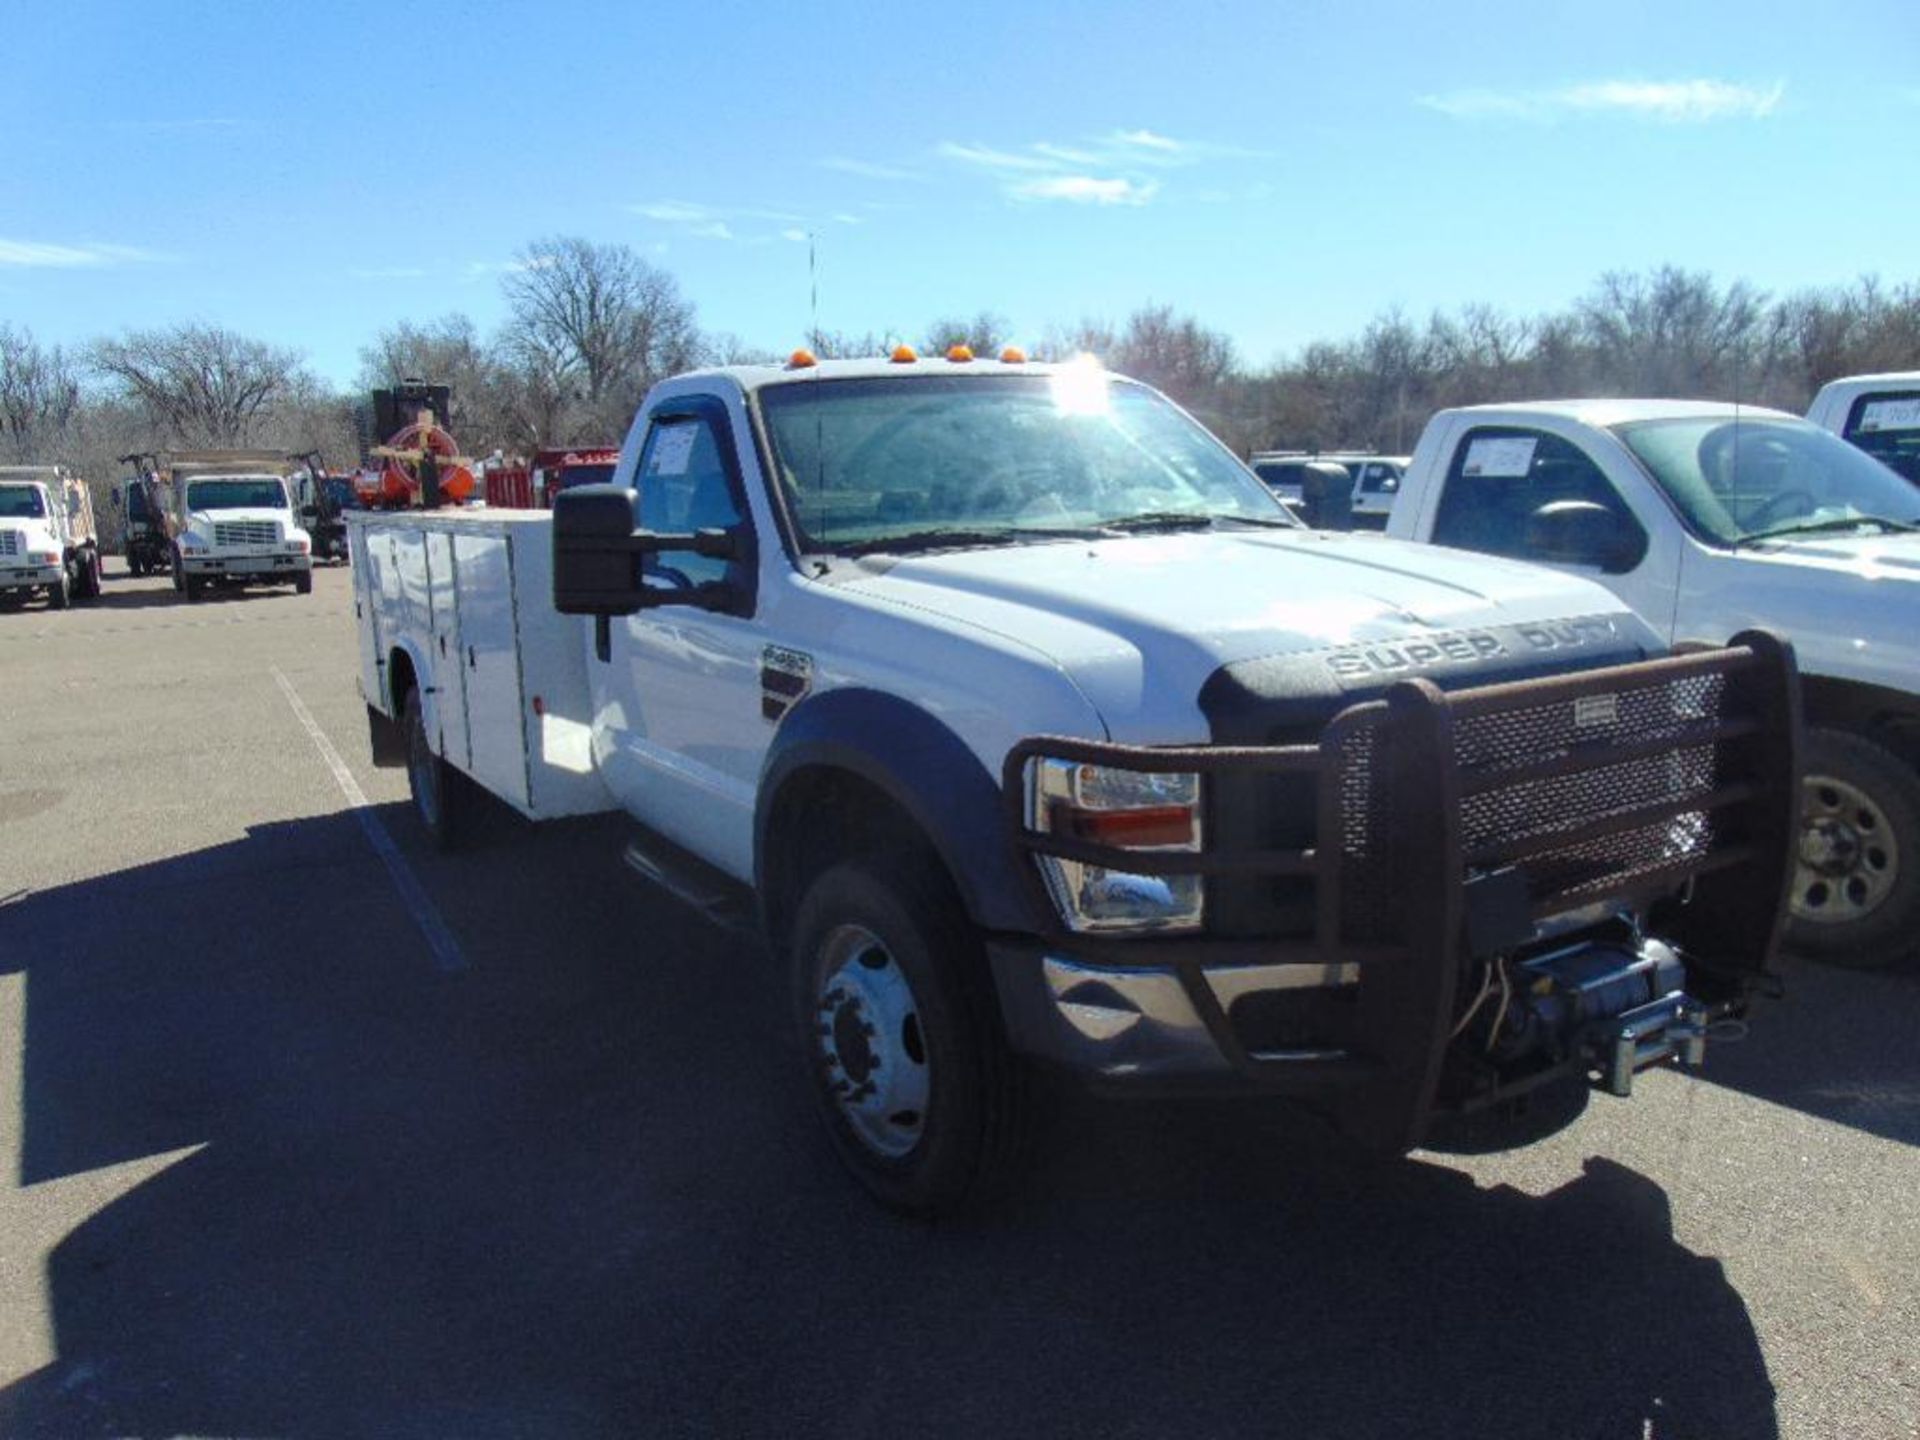 2008 Ford F450 Service Truck s/n 1fdxf46r88eb08550,pwr stroke eng,auto trans, winch, air compressor, - Image 4 of 4